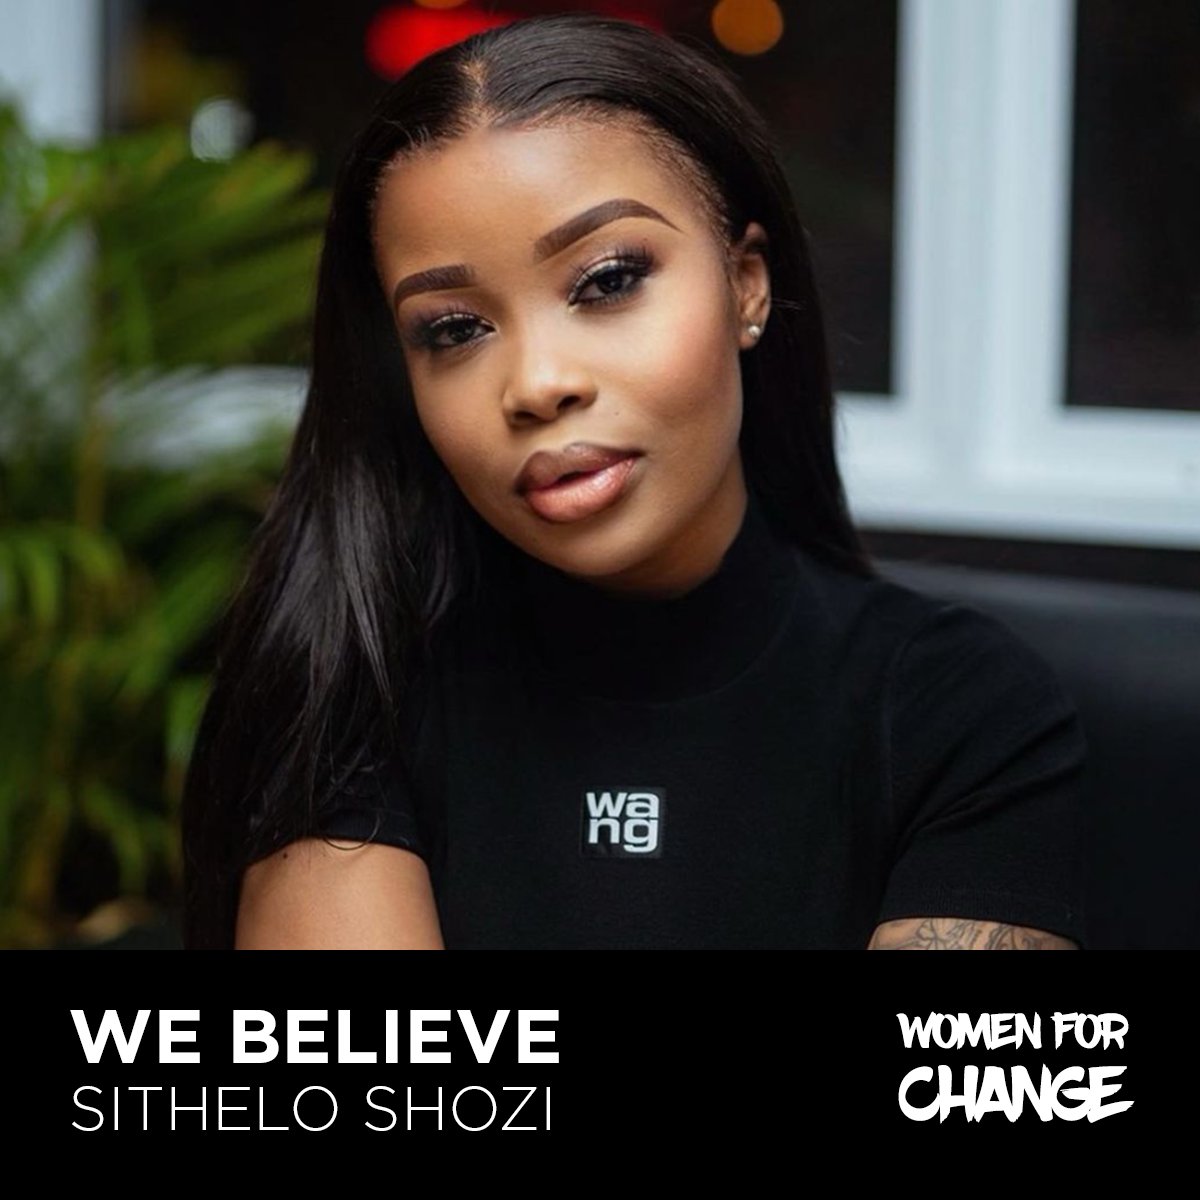 Women For Change on Twitter: "Sithelo, we believe you. We see you. We stand  behind you. #believesithelo #believeher https://t.co/g06HUuw1ol" / Twitter